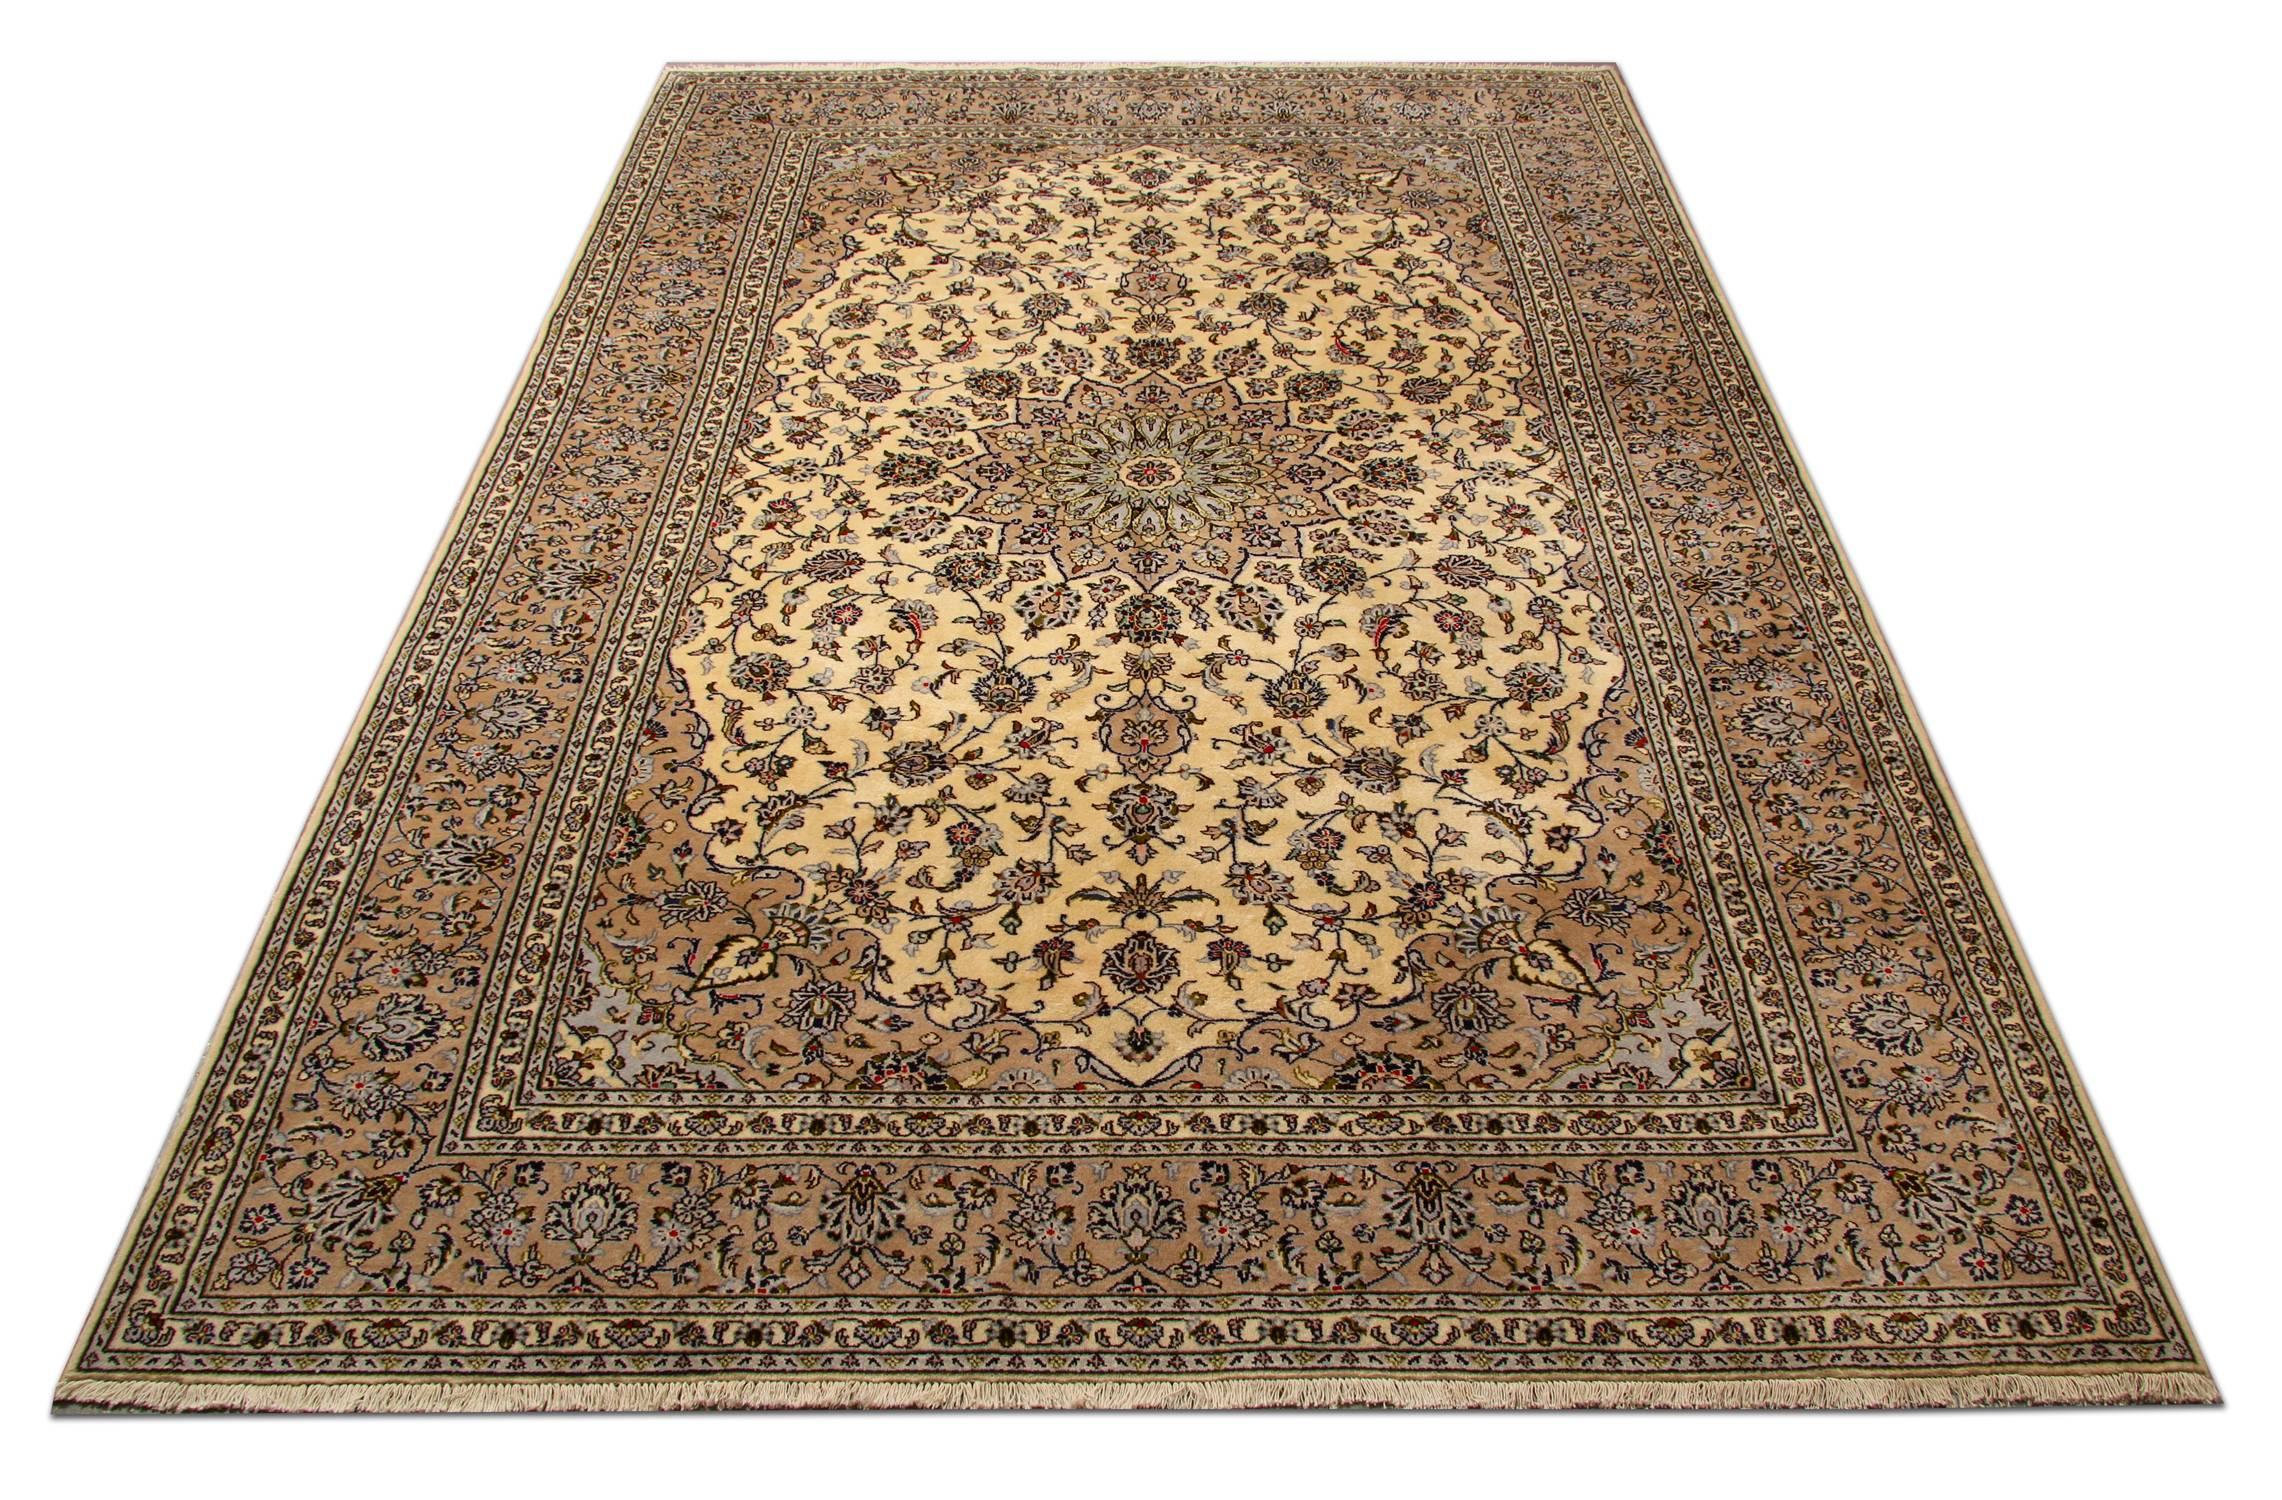 Featuring a grande central medallion and highly decorative surround design, this handwoven wool rug is sure to uplift any room. Constructed on a cream background with deep blue, beige, brown and red accent colours that make up the symmetrical floral